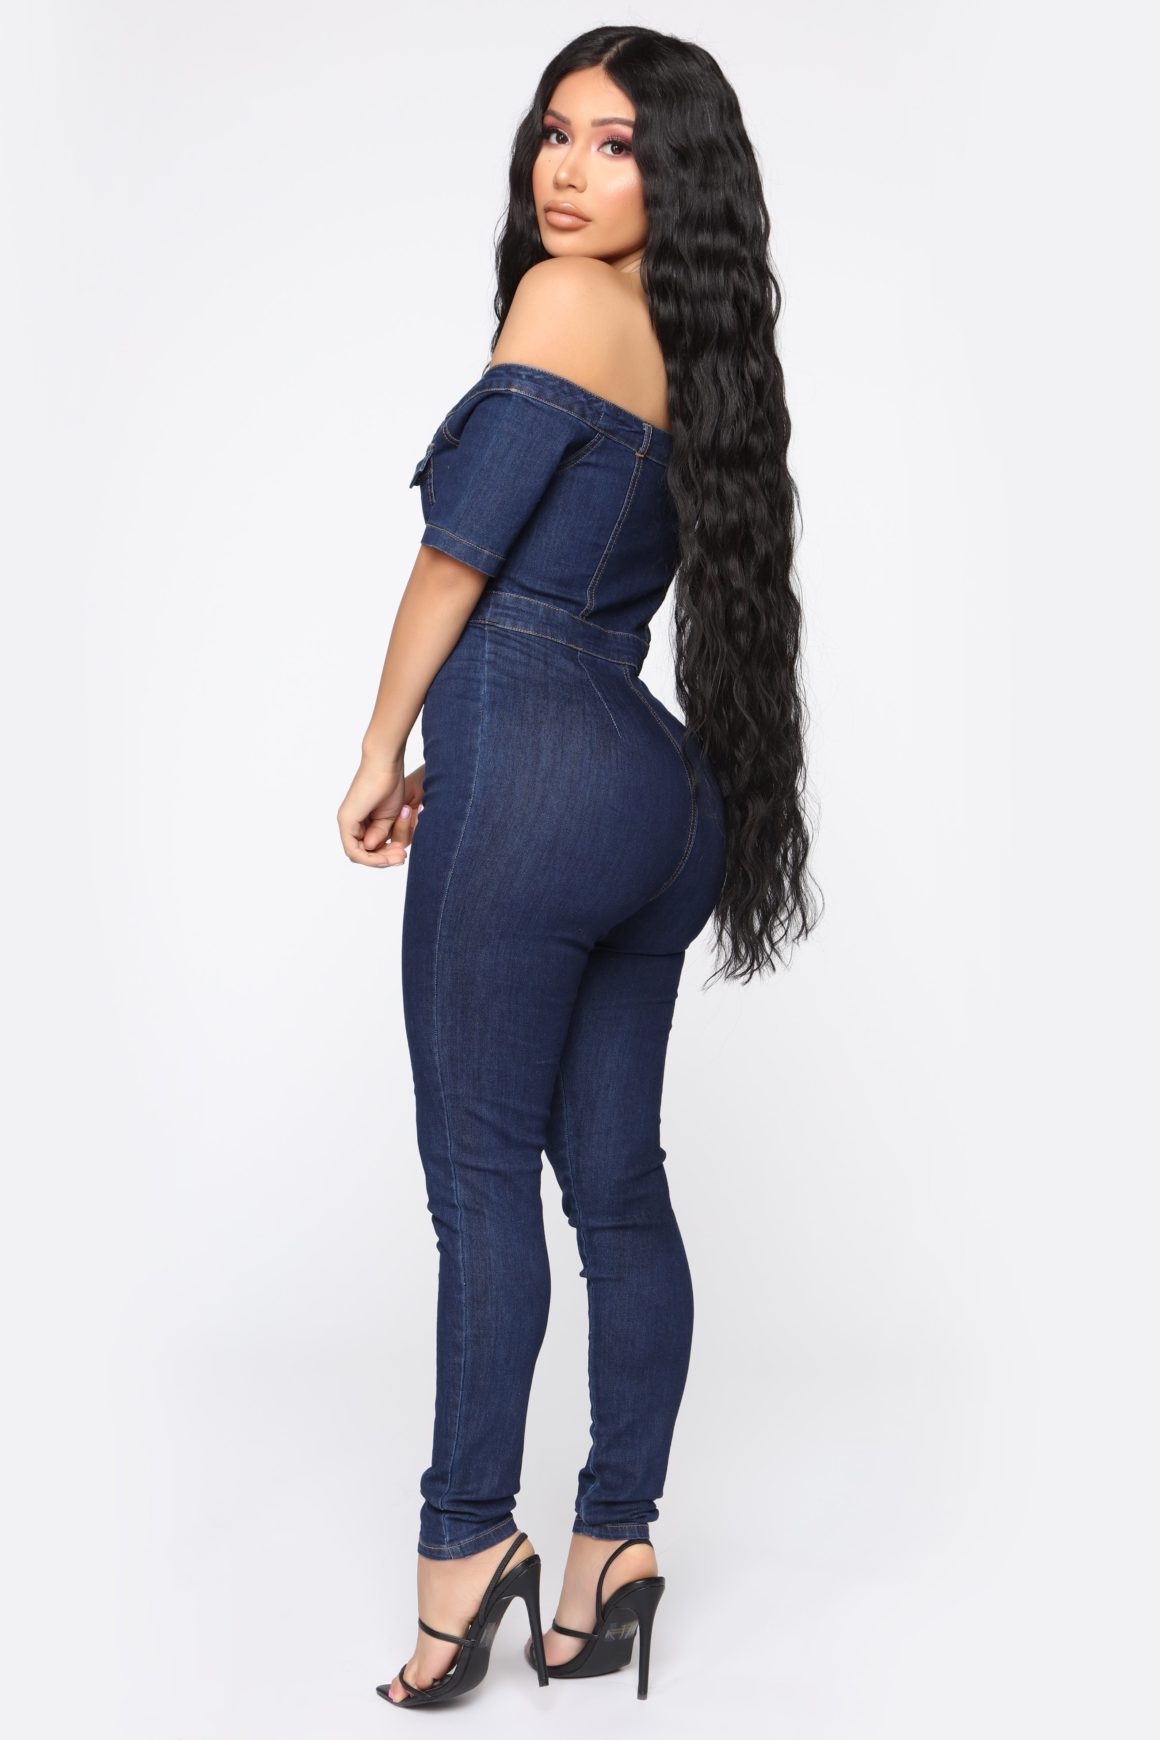 Keep it Comfortable in Separates from Fashion Nova 